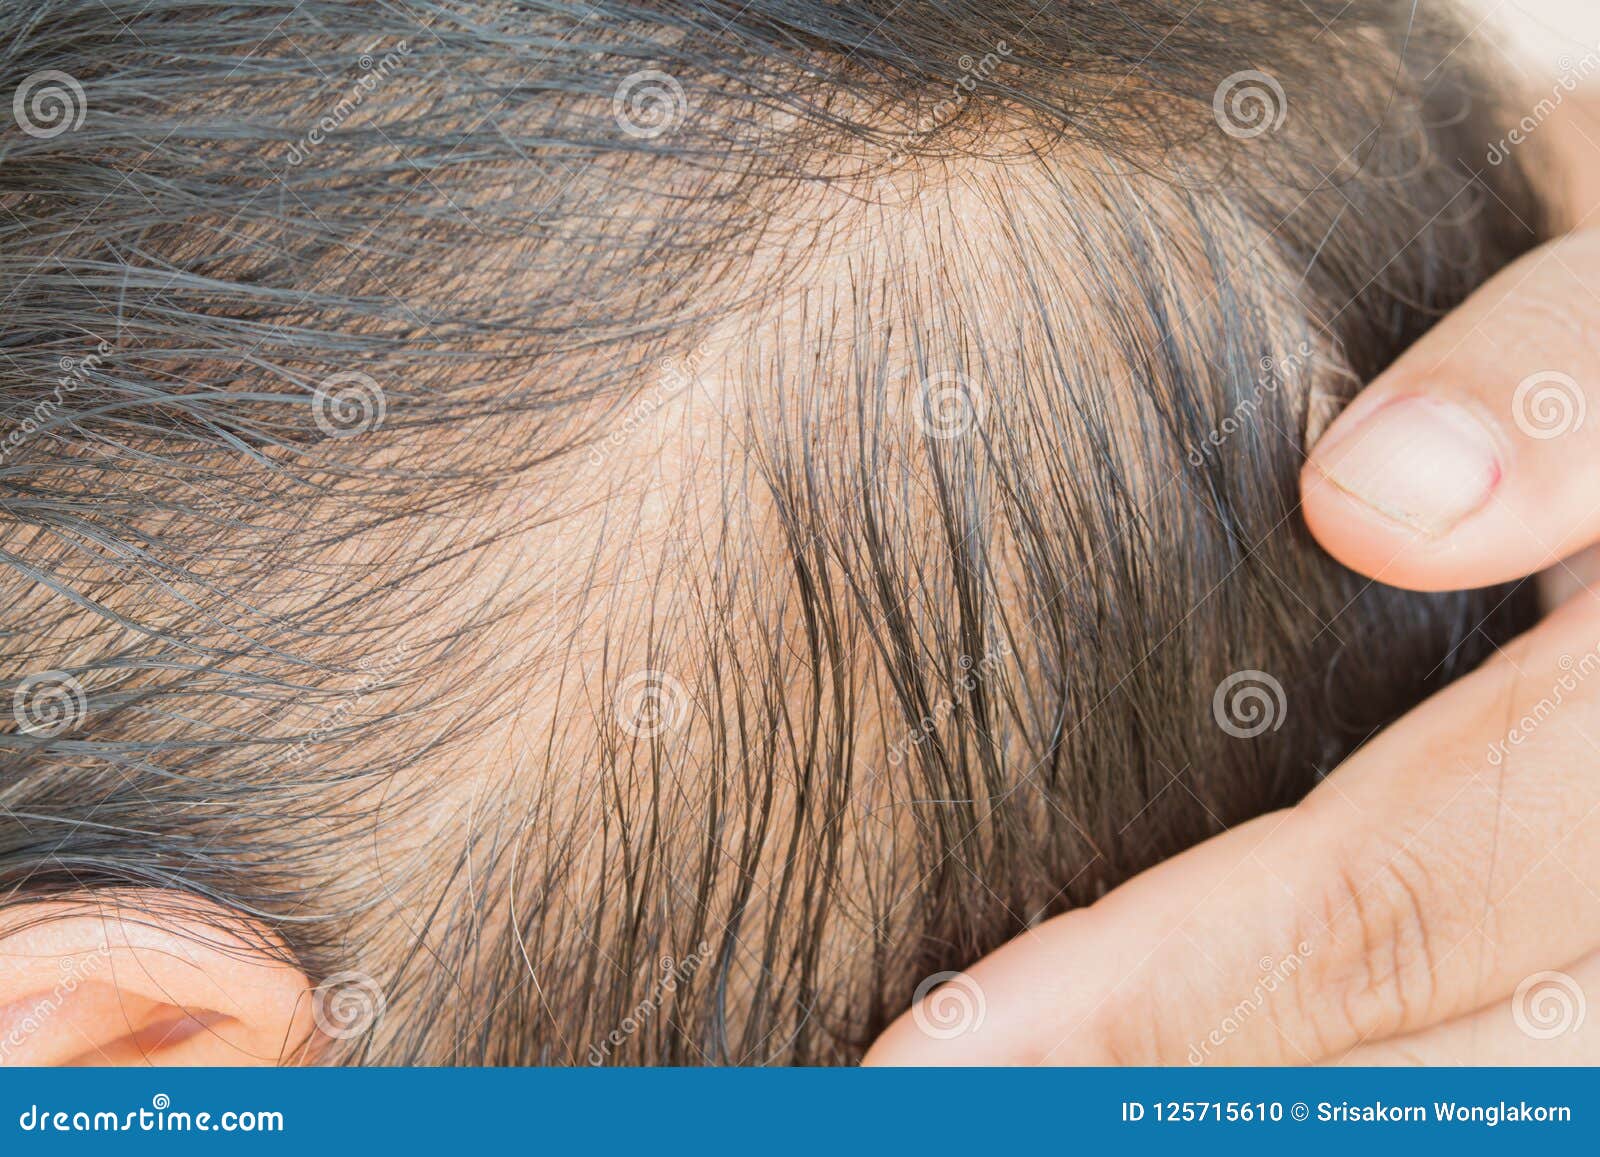 Thin Hair and Scalp and Broken Hair Stock Photo - Image of health, medical:  125715610